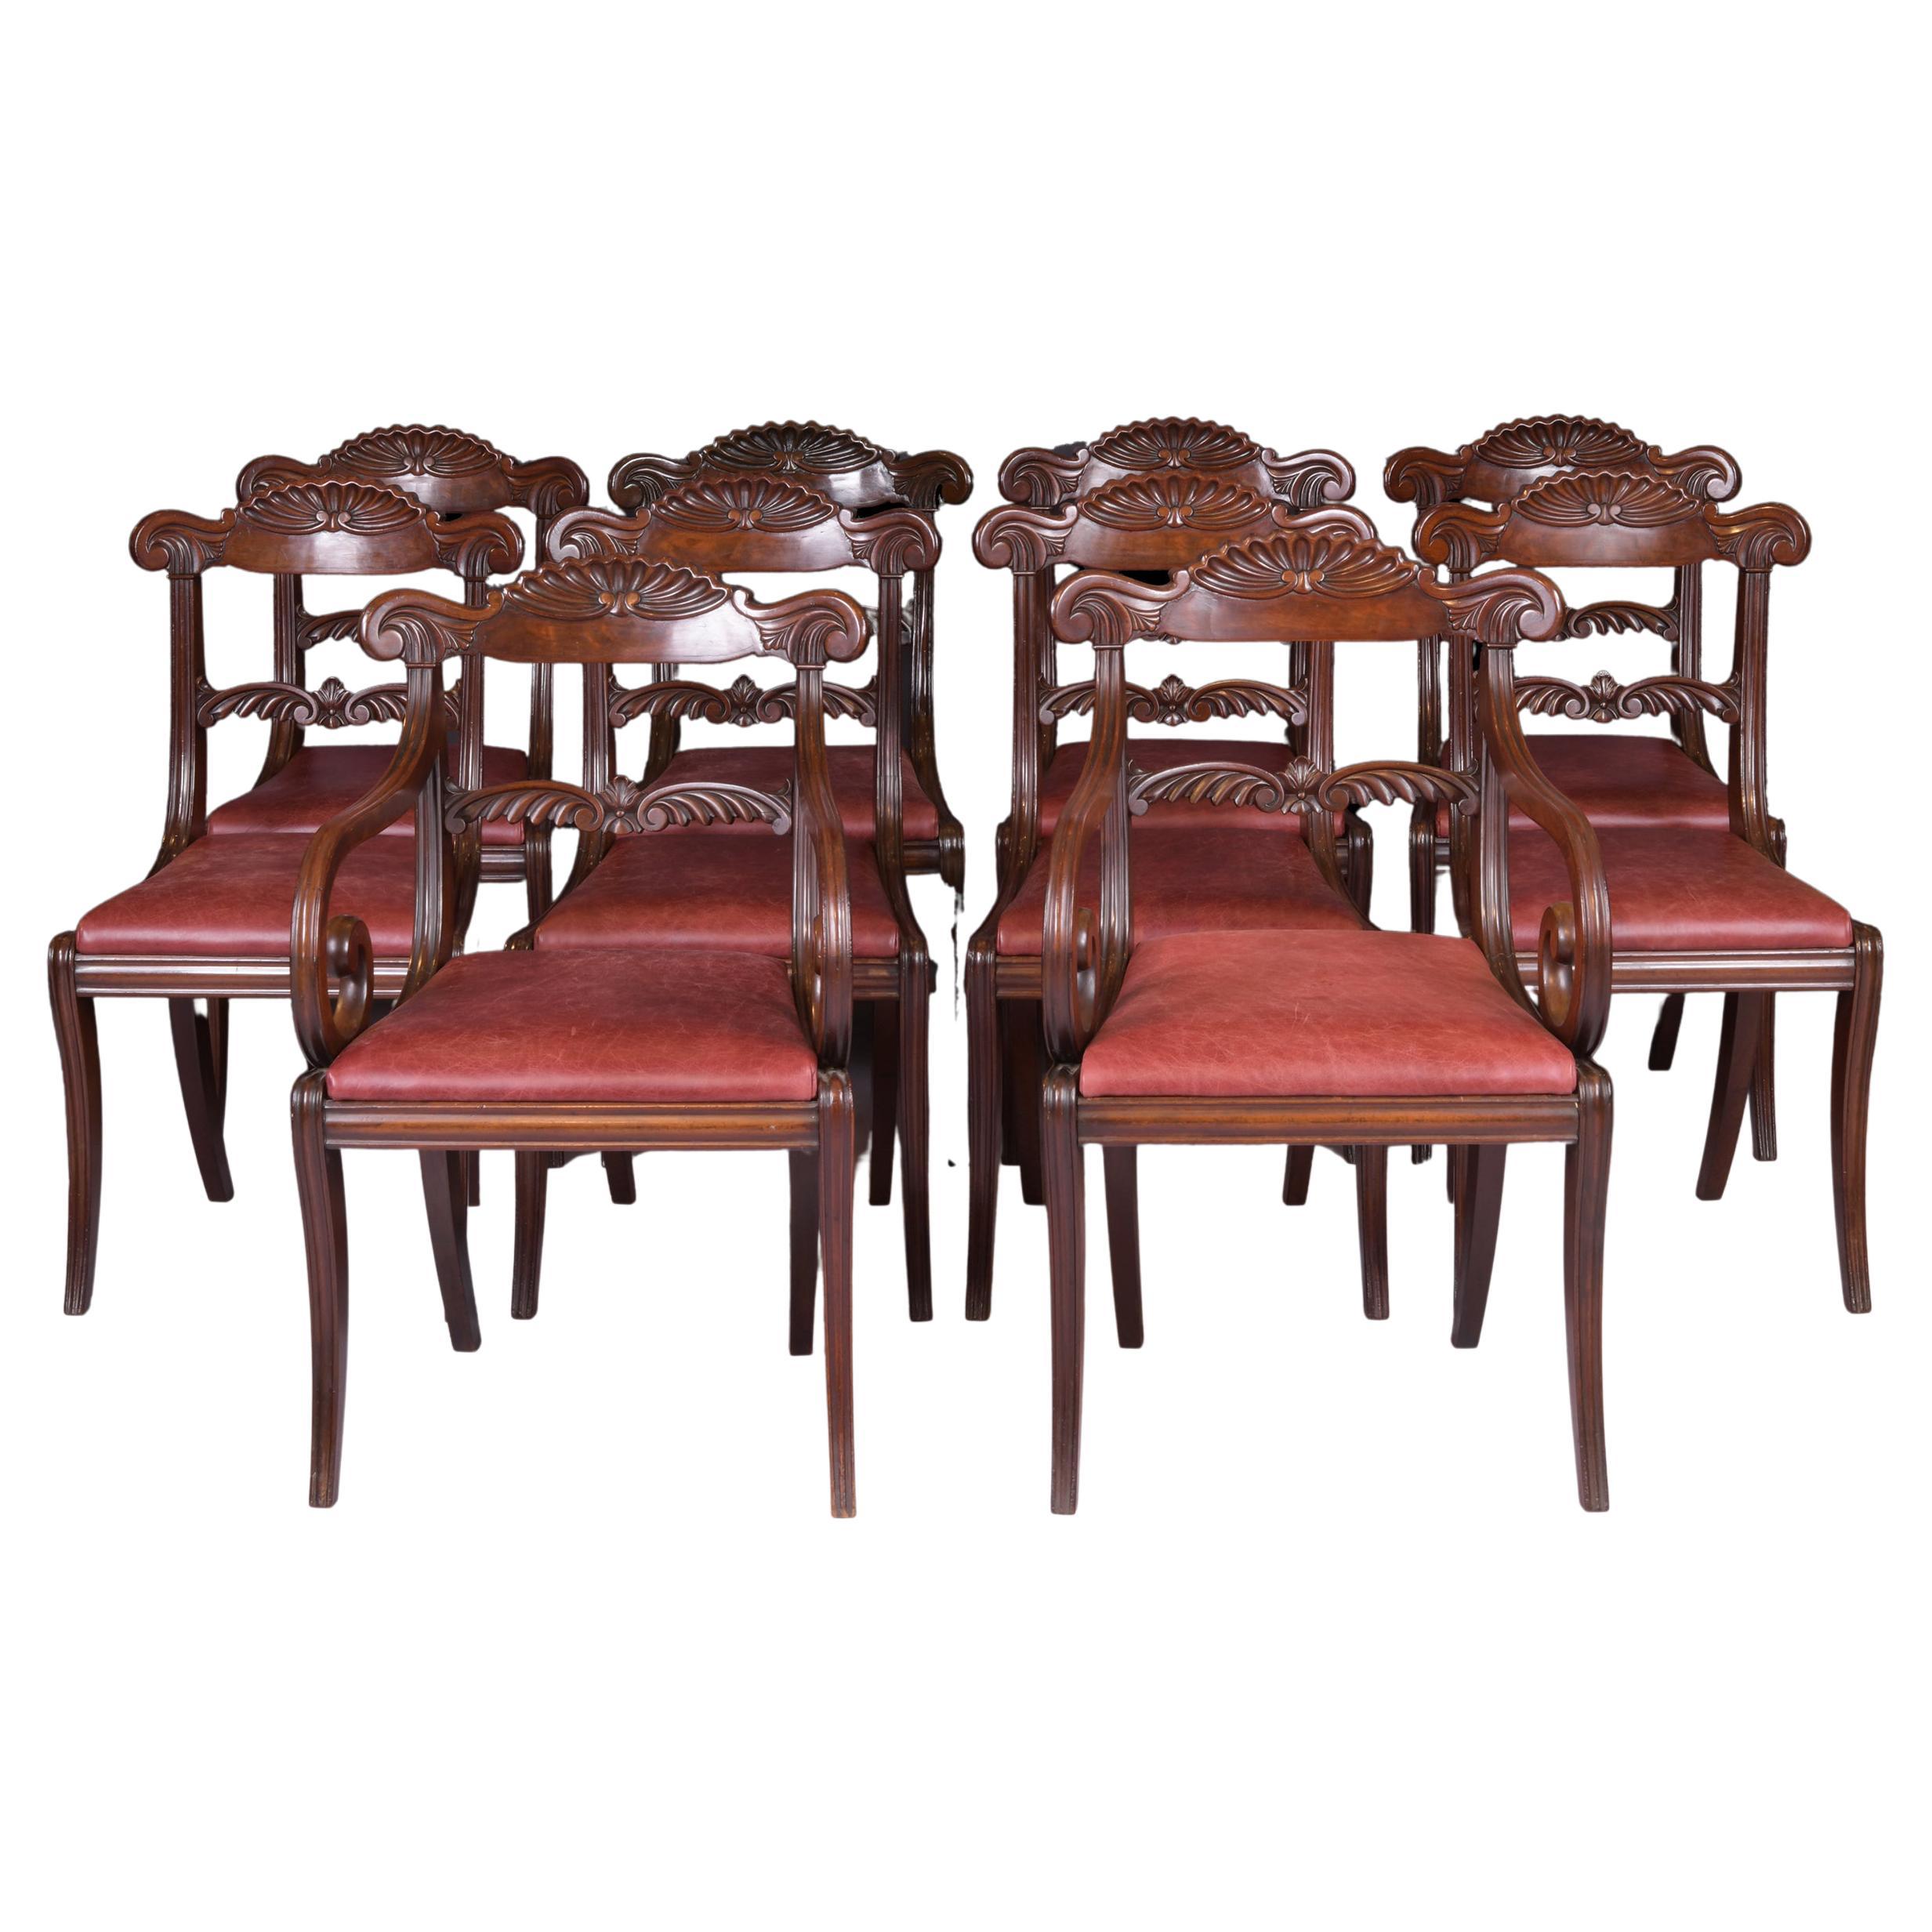 Set of 10 Early 19th Century Regency Mahogany Dining Room Chairs For Sale